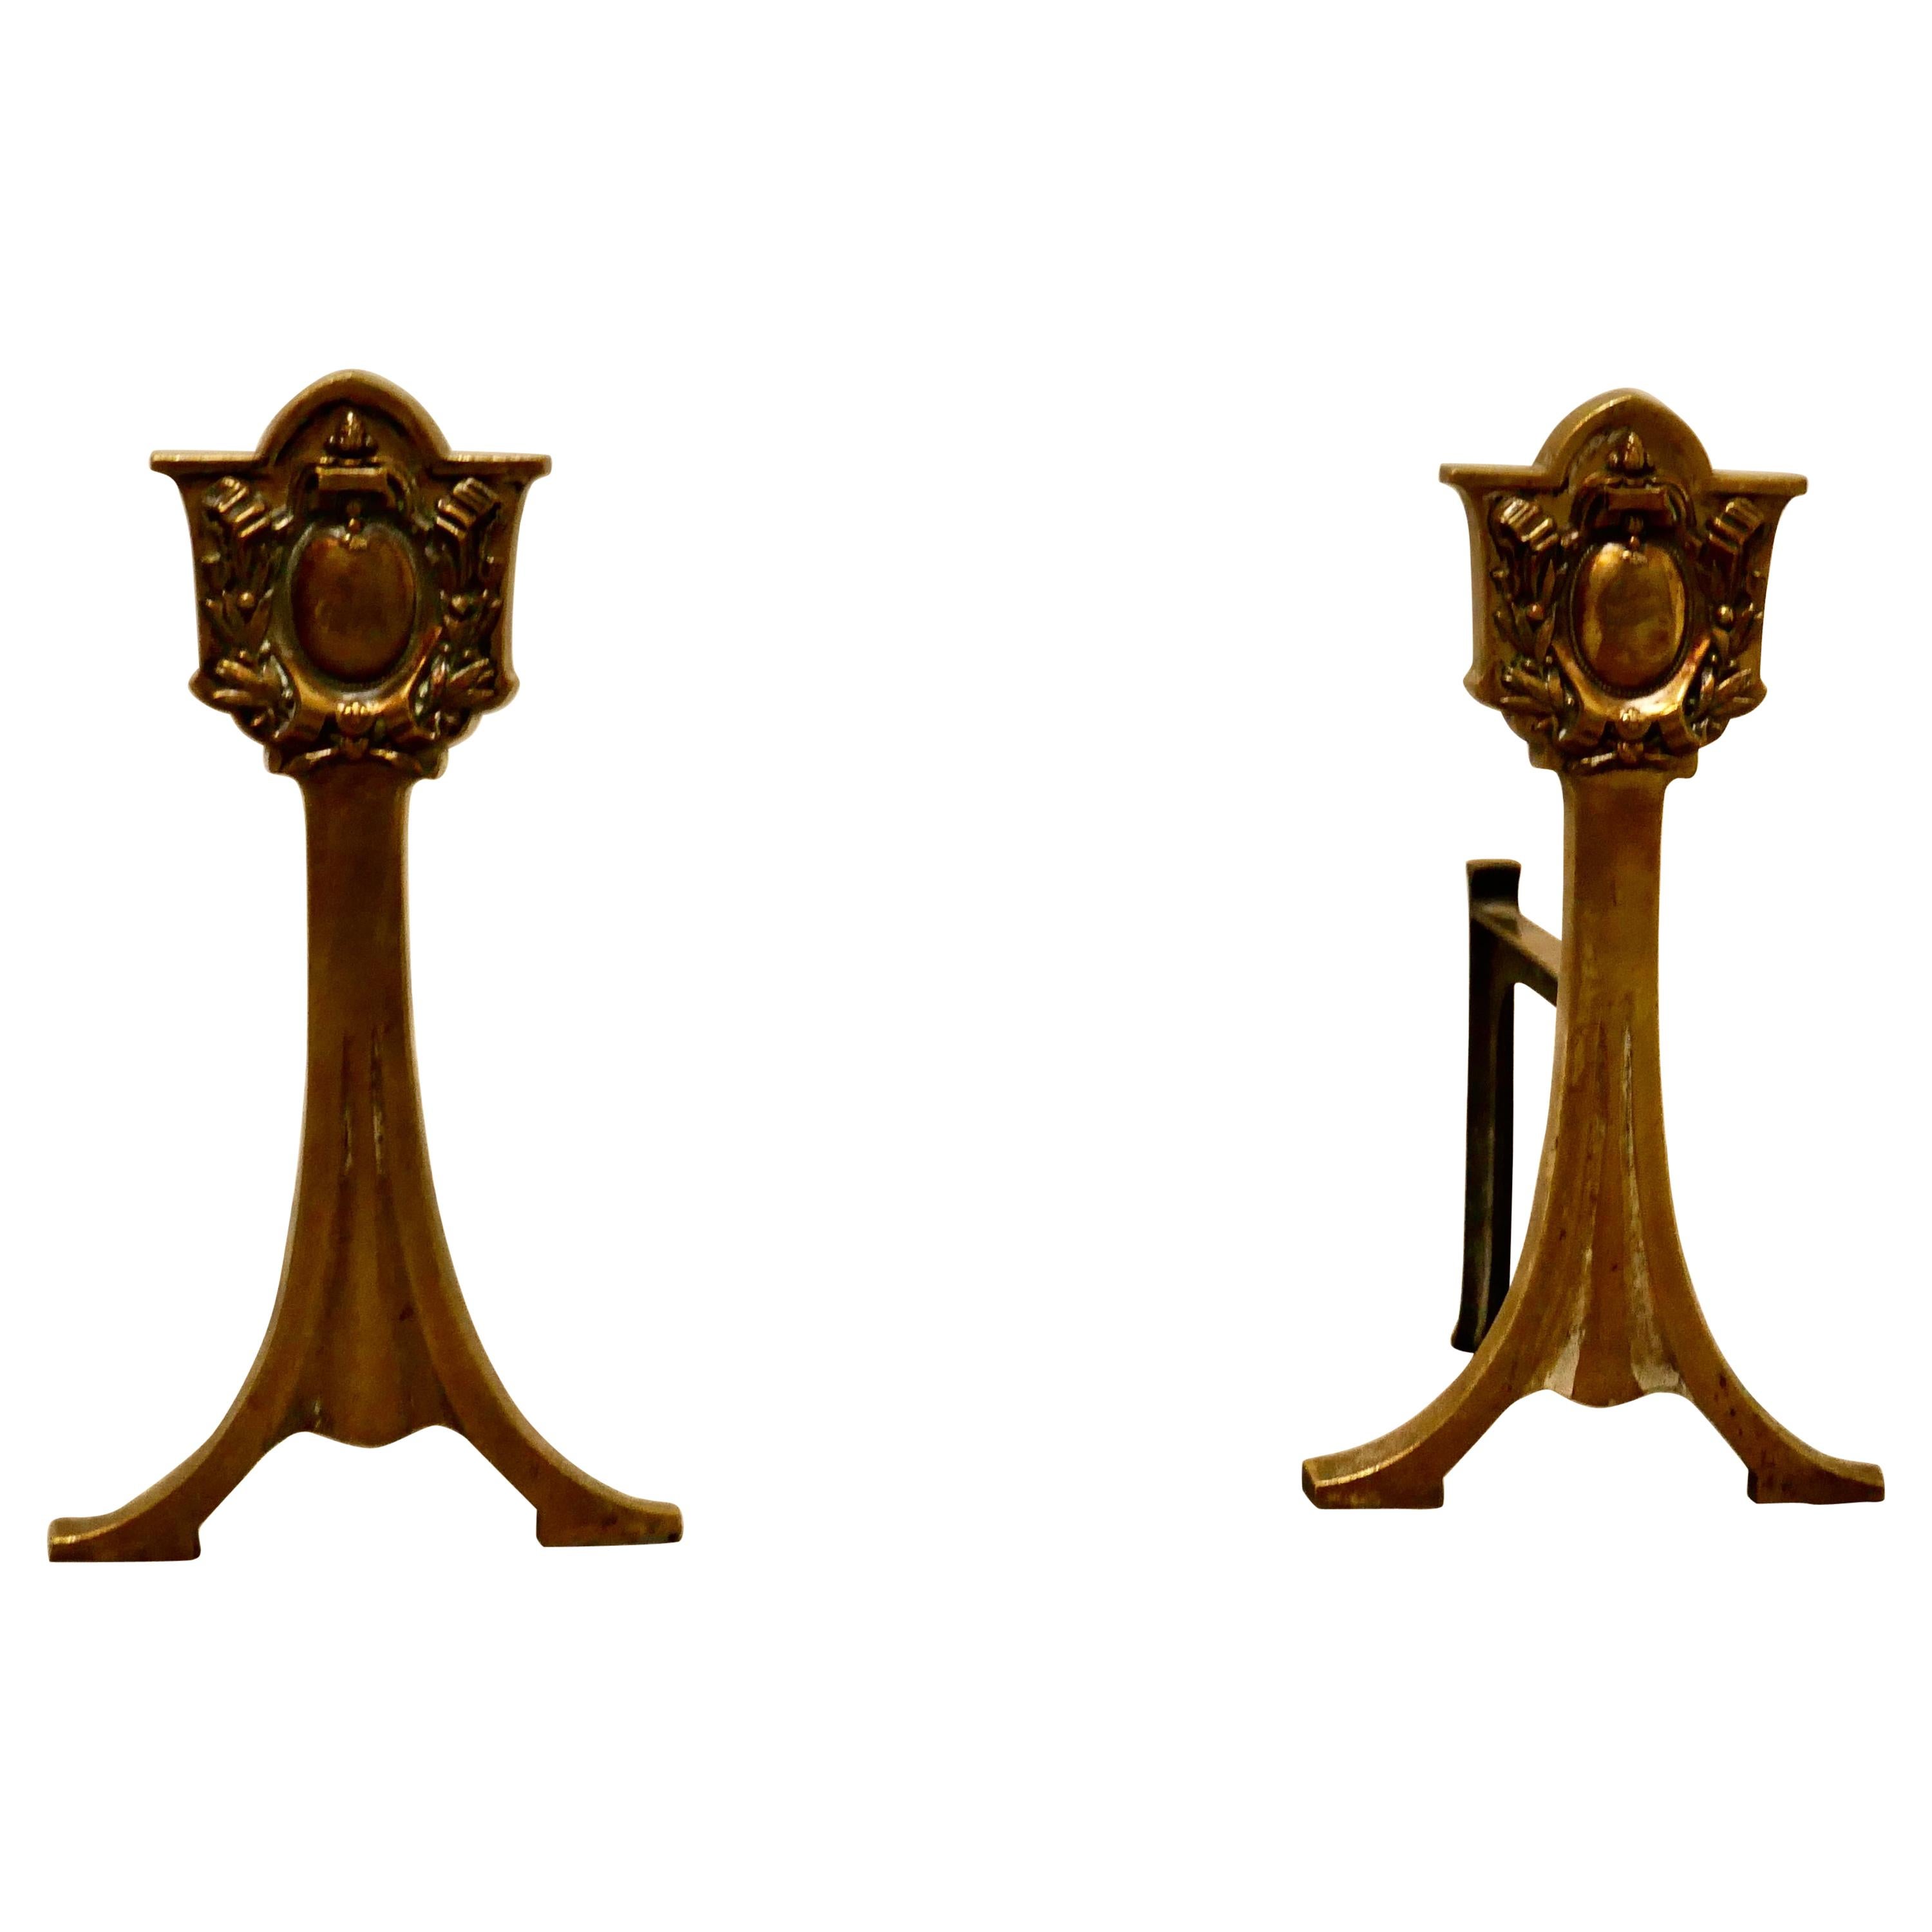 Elegant Pair of 19th Century Brass Andirons or Fire Dogs For Sale